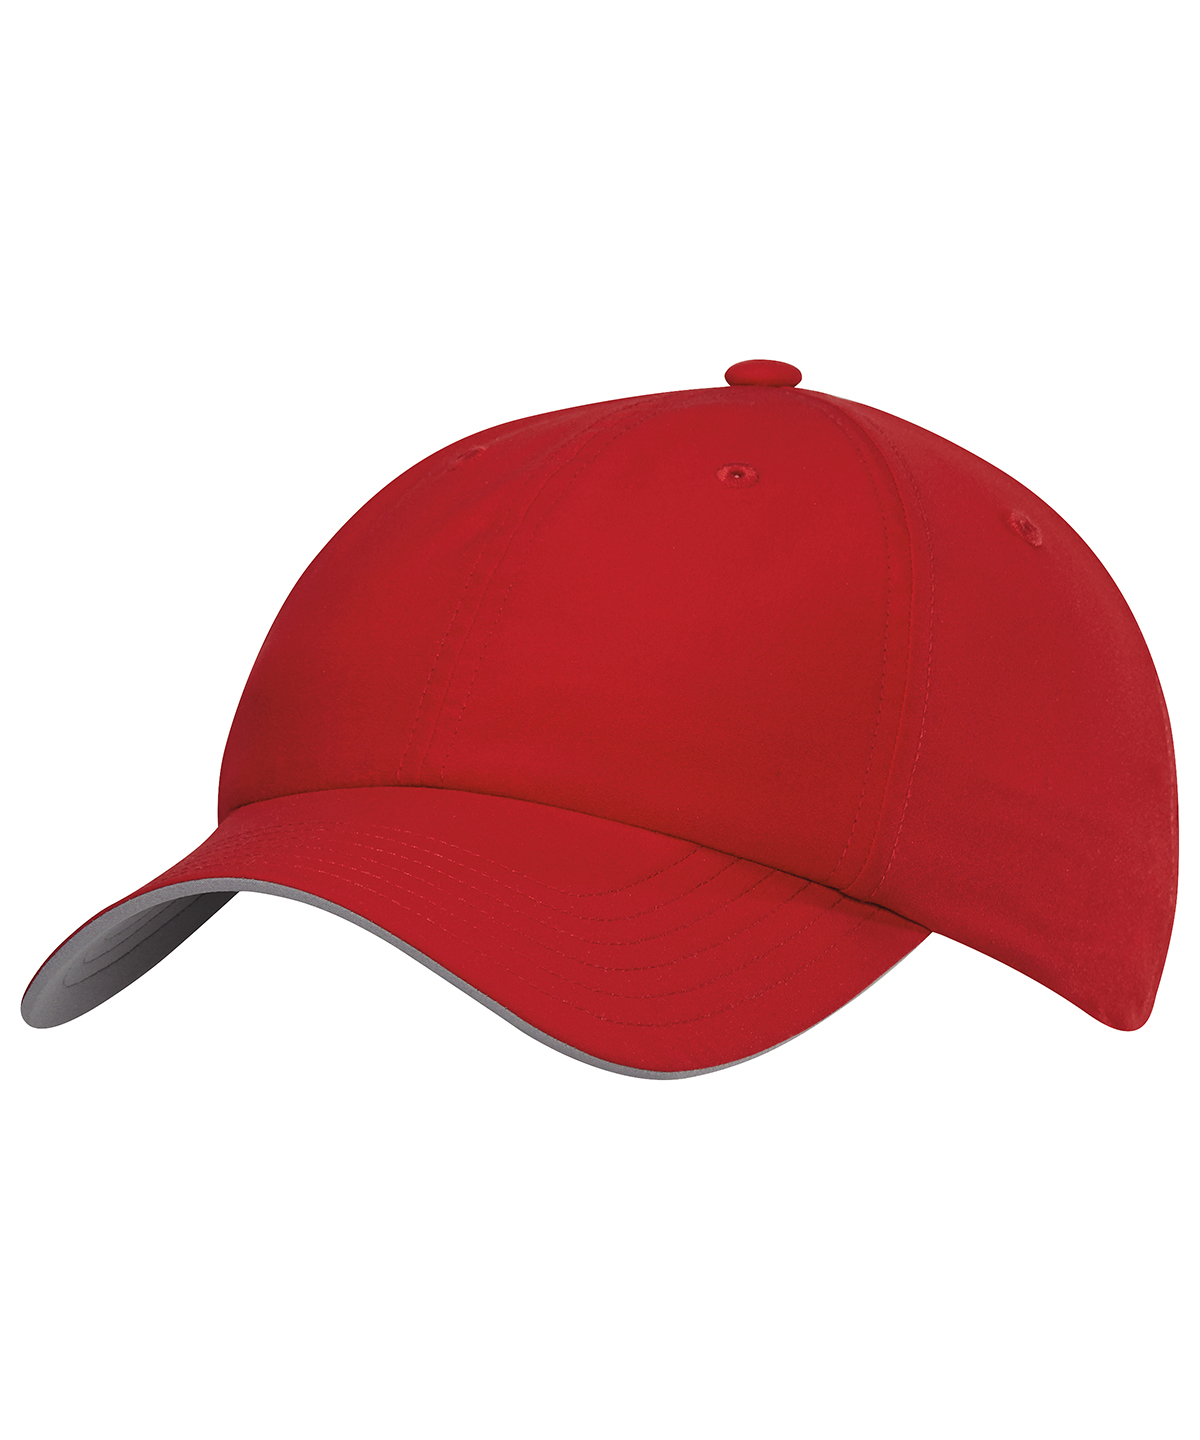 Performance Cap Power Red Size One Size